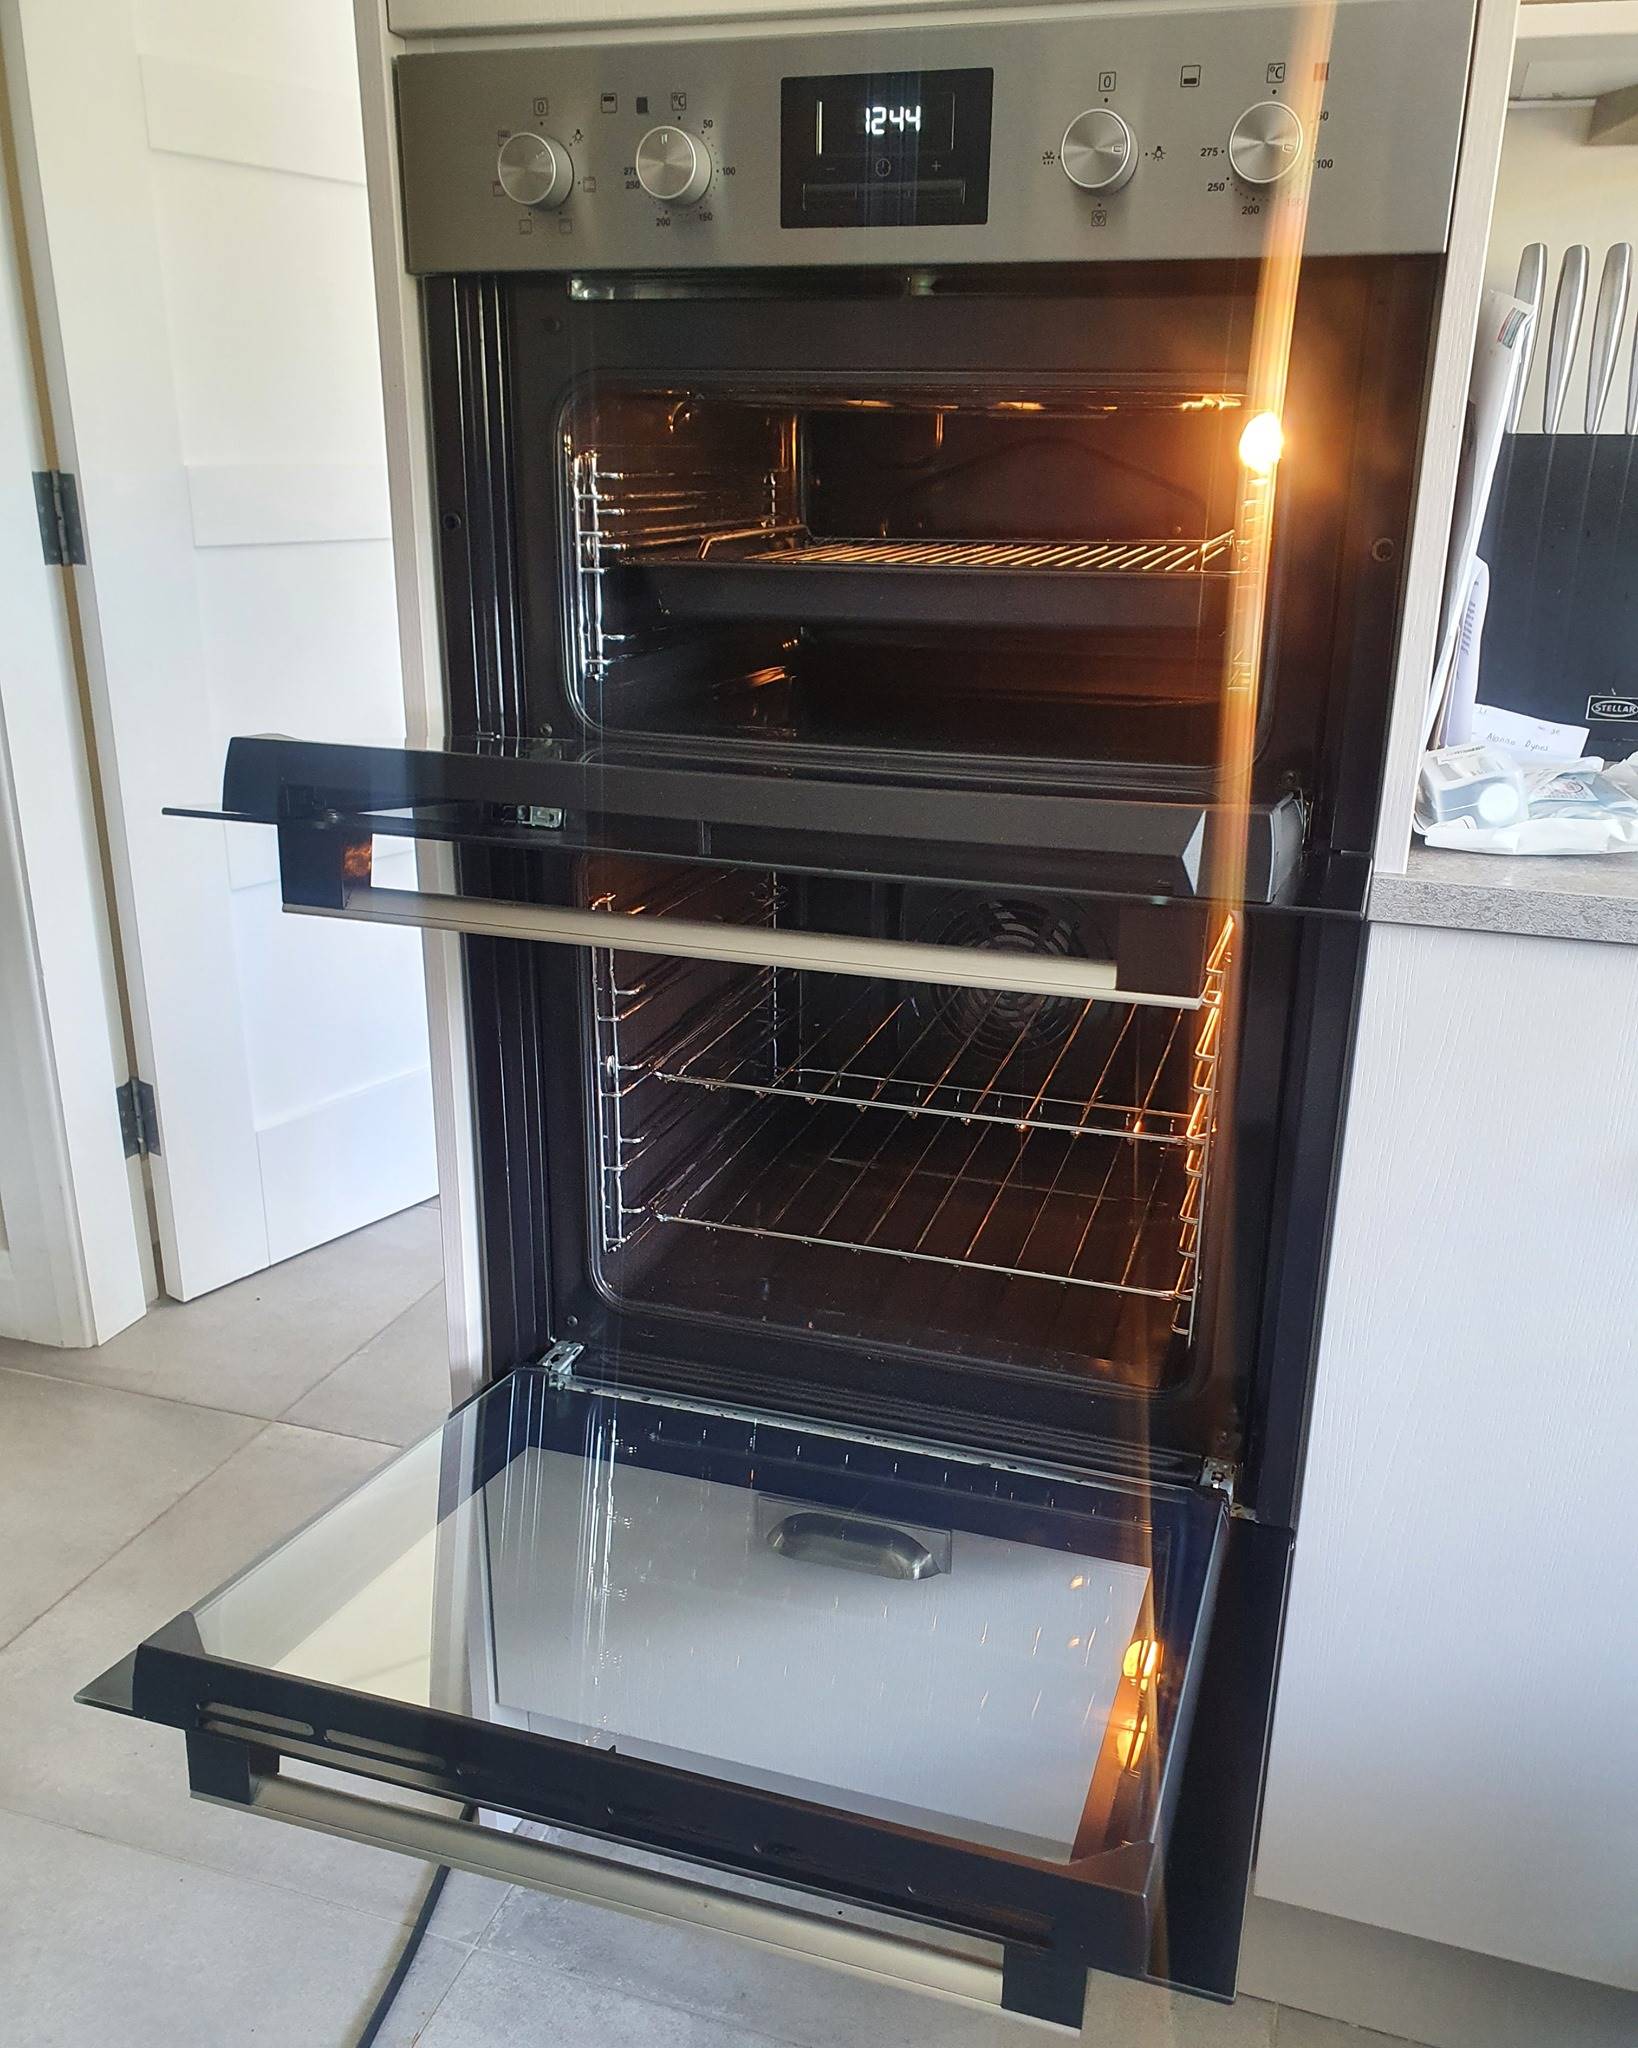 Oven & Grill Clean | Clean Oven Belfast | Oven Cleaning NI | Oven Clean ni | Kitchen Cleaning NI | Oven Cleaning Belfast | Kitchen Appliance Cleaning Belfast | Oven Clean NI